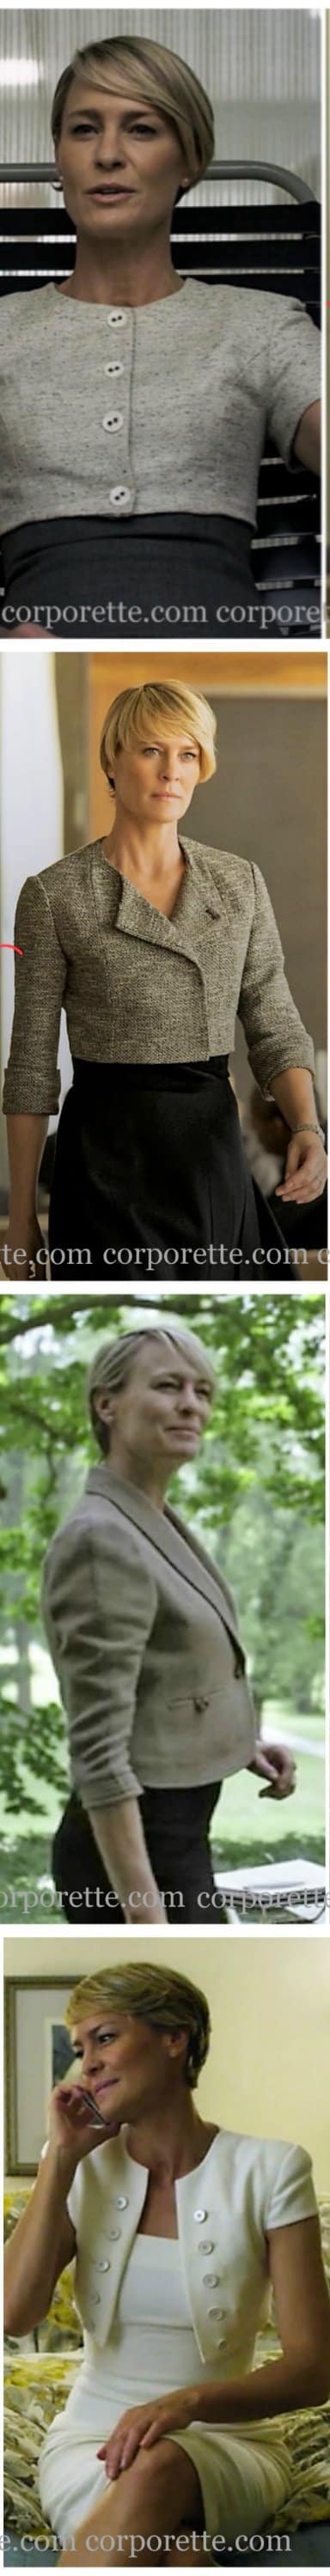 Cropped jackets for the office: yea or nay? If you've always wanted to dress like Claire Underwood in House of Cards, they may be a yea -- she wears a TON of cropped blazers and jackets for work. See the other best style tips you can take from Robin Wright's character in House of Cards.